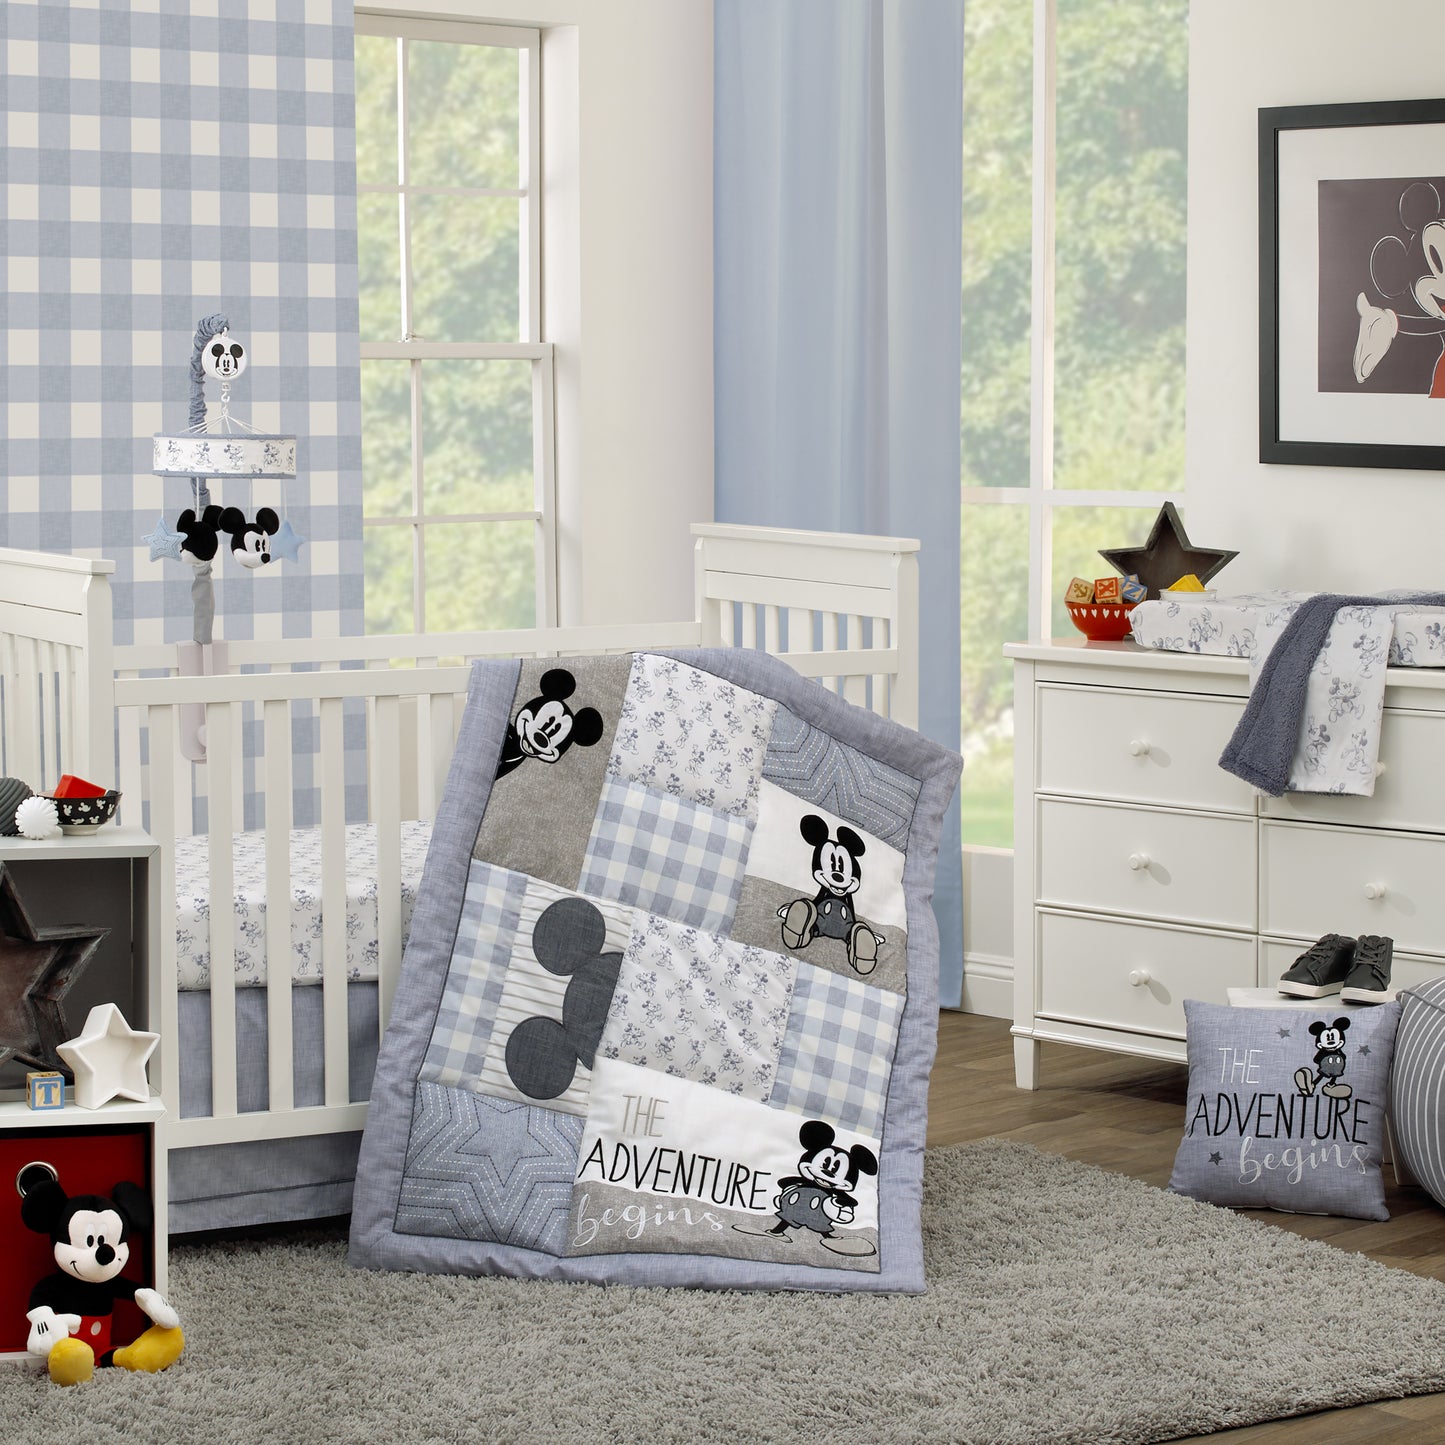 Disney Mickey Mouse - Call Me Mickey Blue, White, and Gray The Adventure Begins Stars and Gingham 3 Piece Nursery Crib Bedding Set - Comforter, 100% Cotton Fitted Crib Sheet, and Crib Skirt